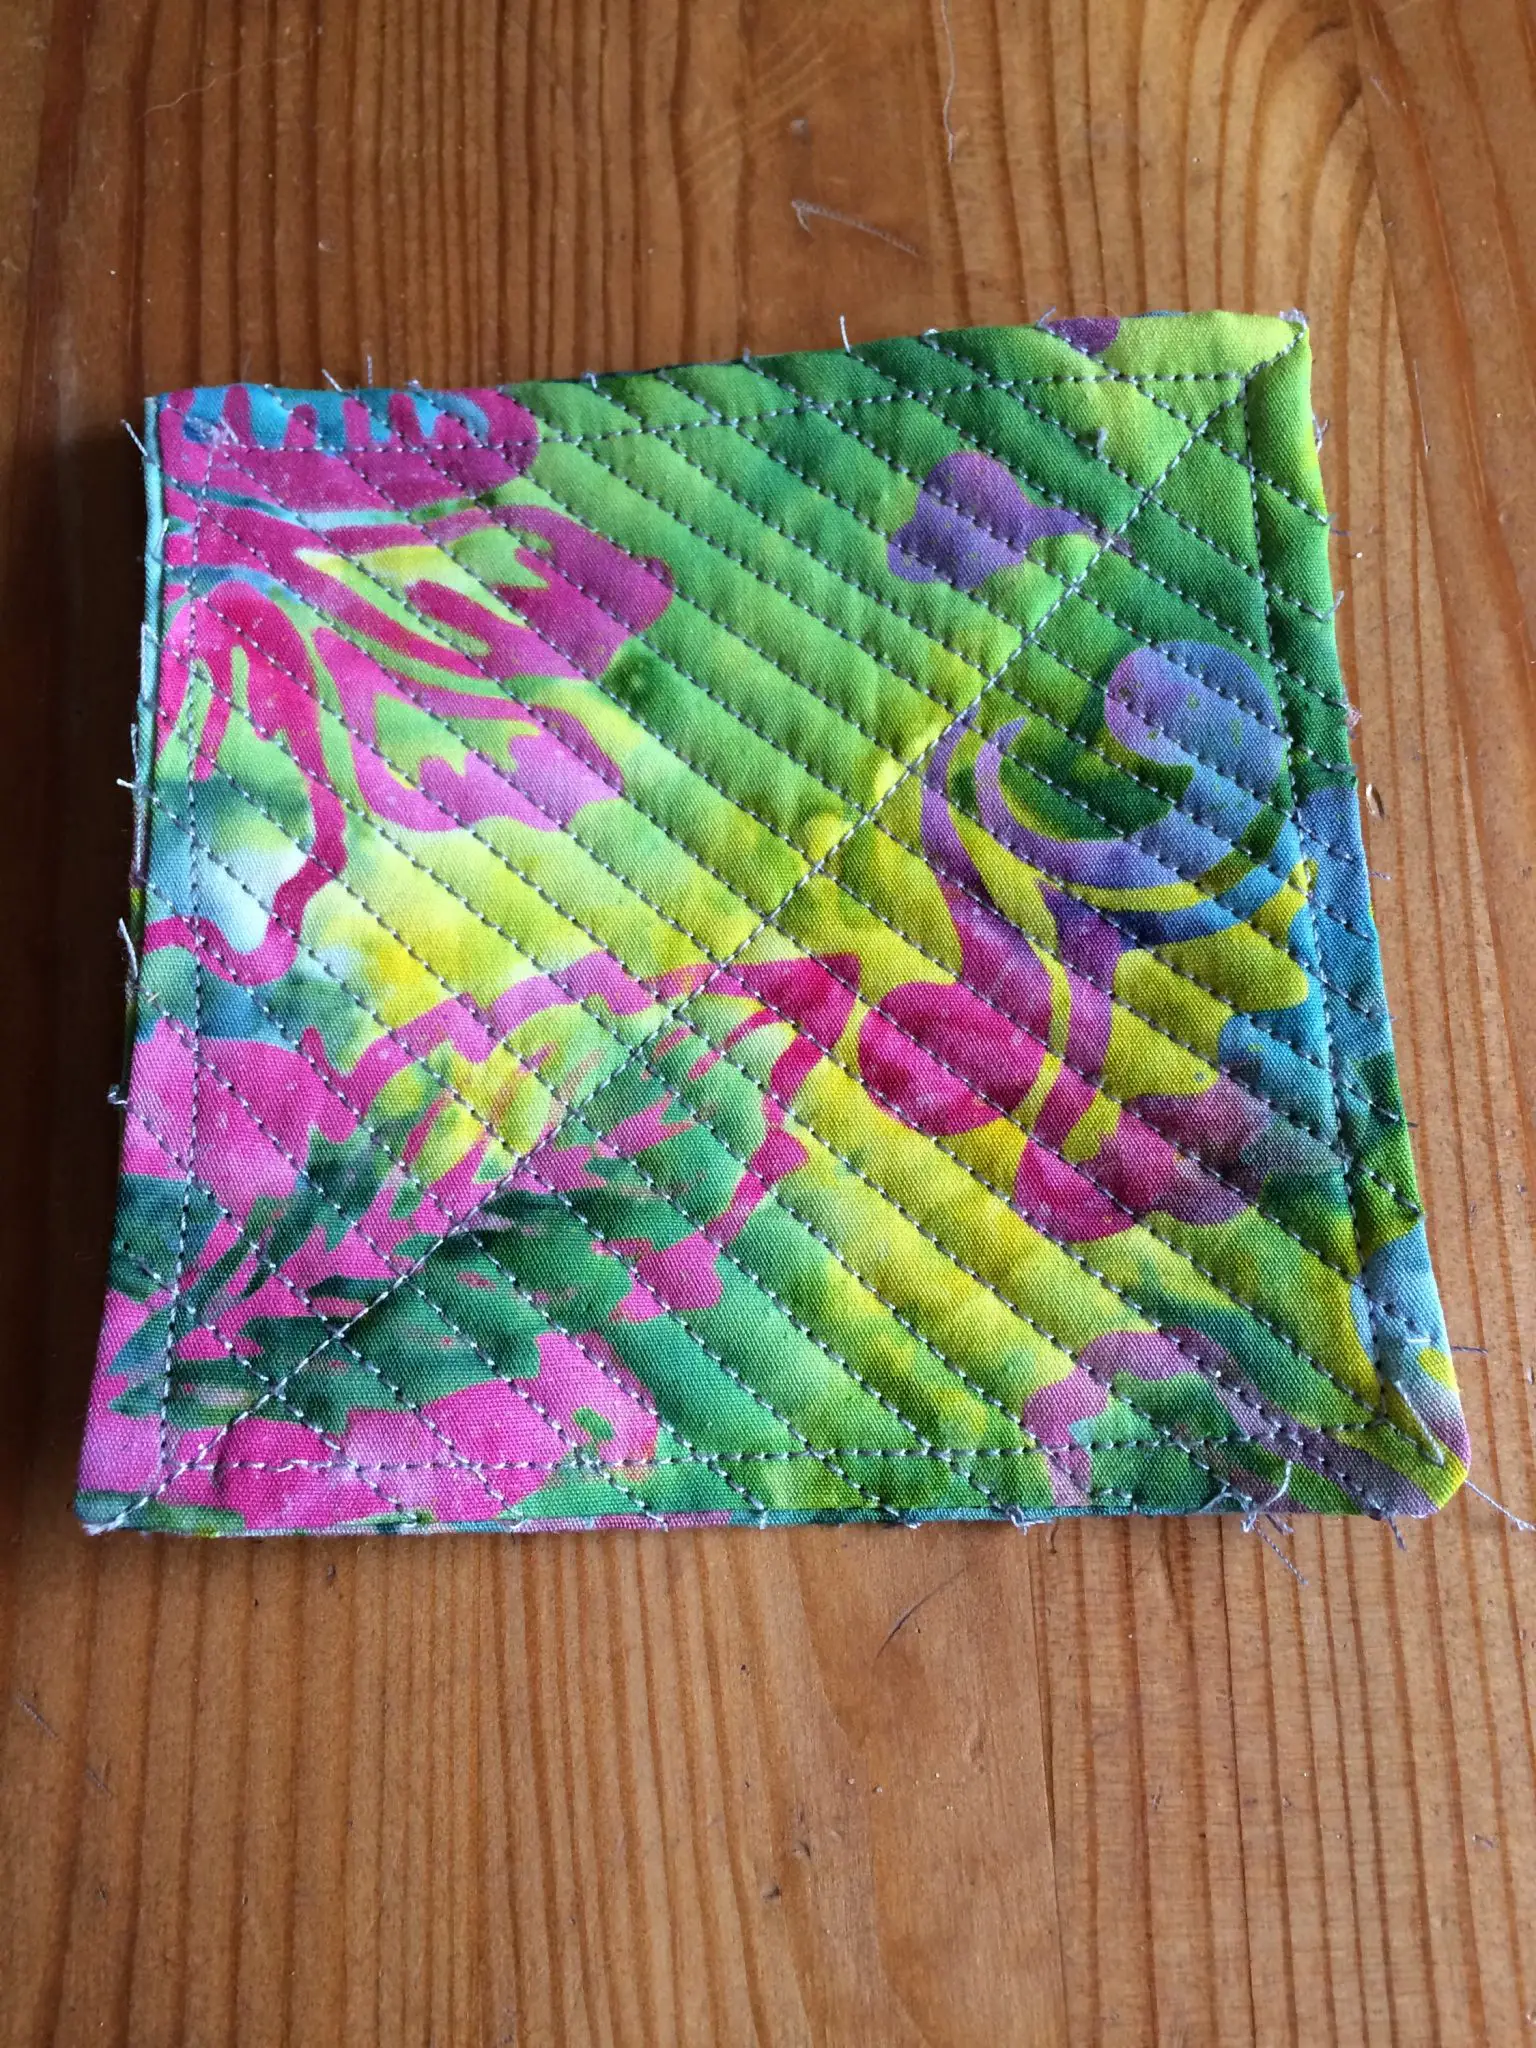 Sewing a quilted coaster